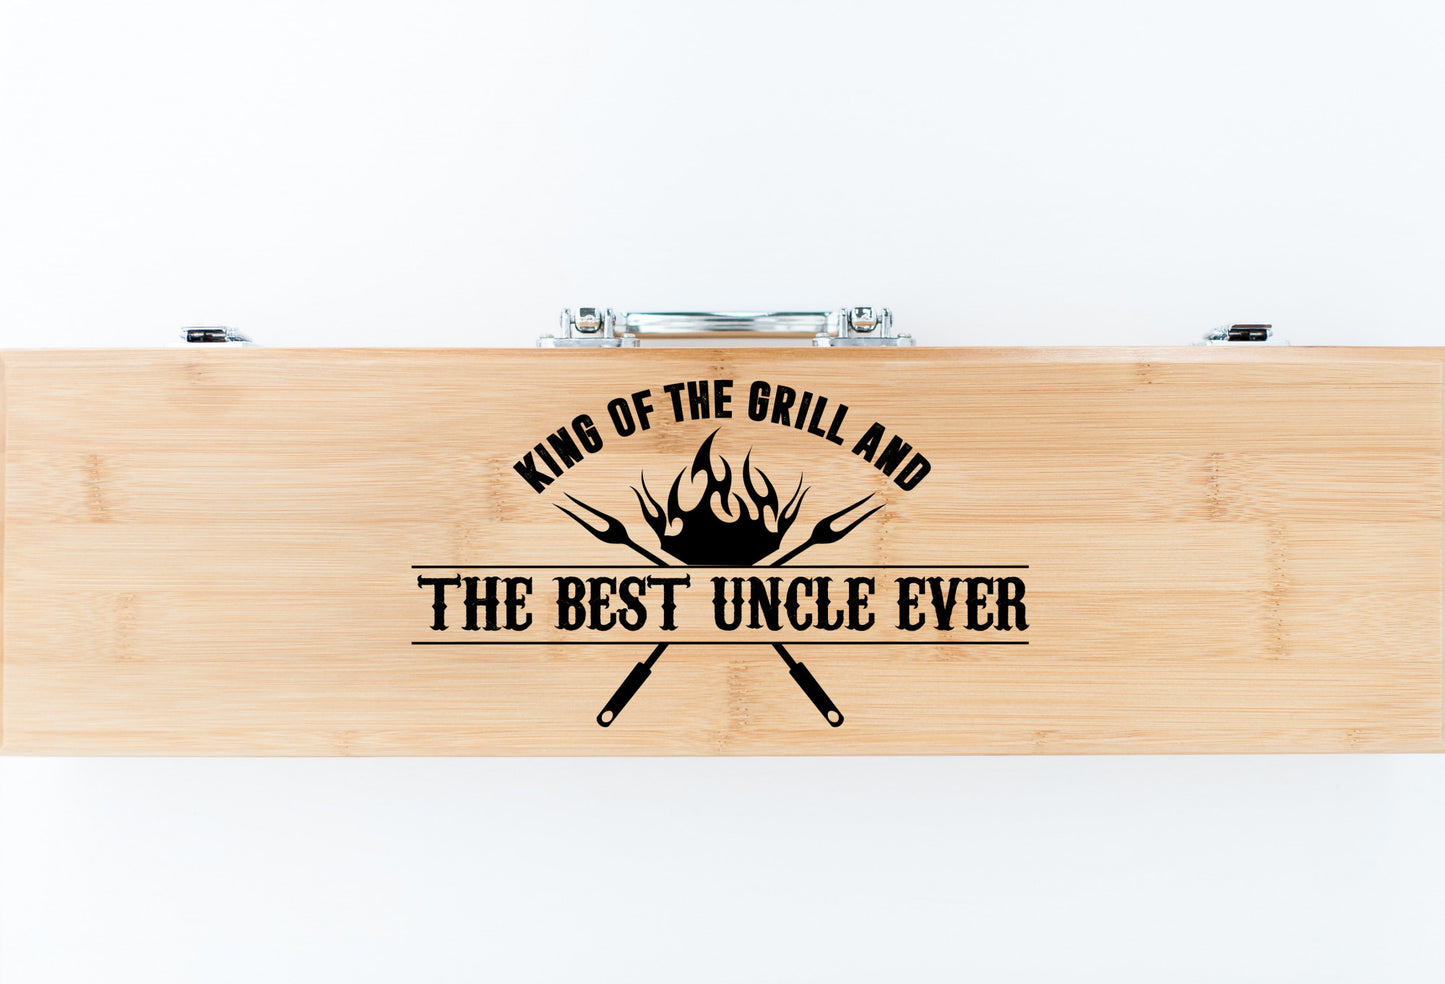 King Of The Grill And The Best Uncle Ever Bamboo Grill Set